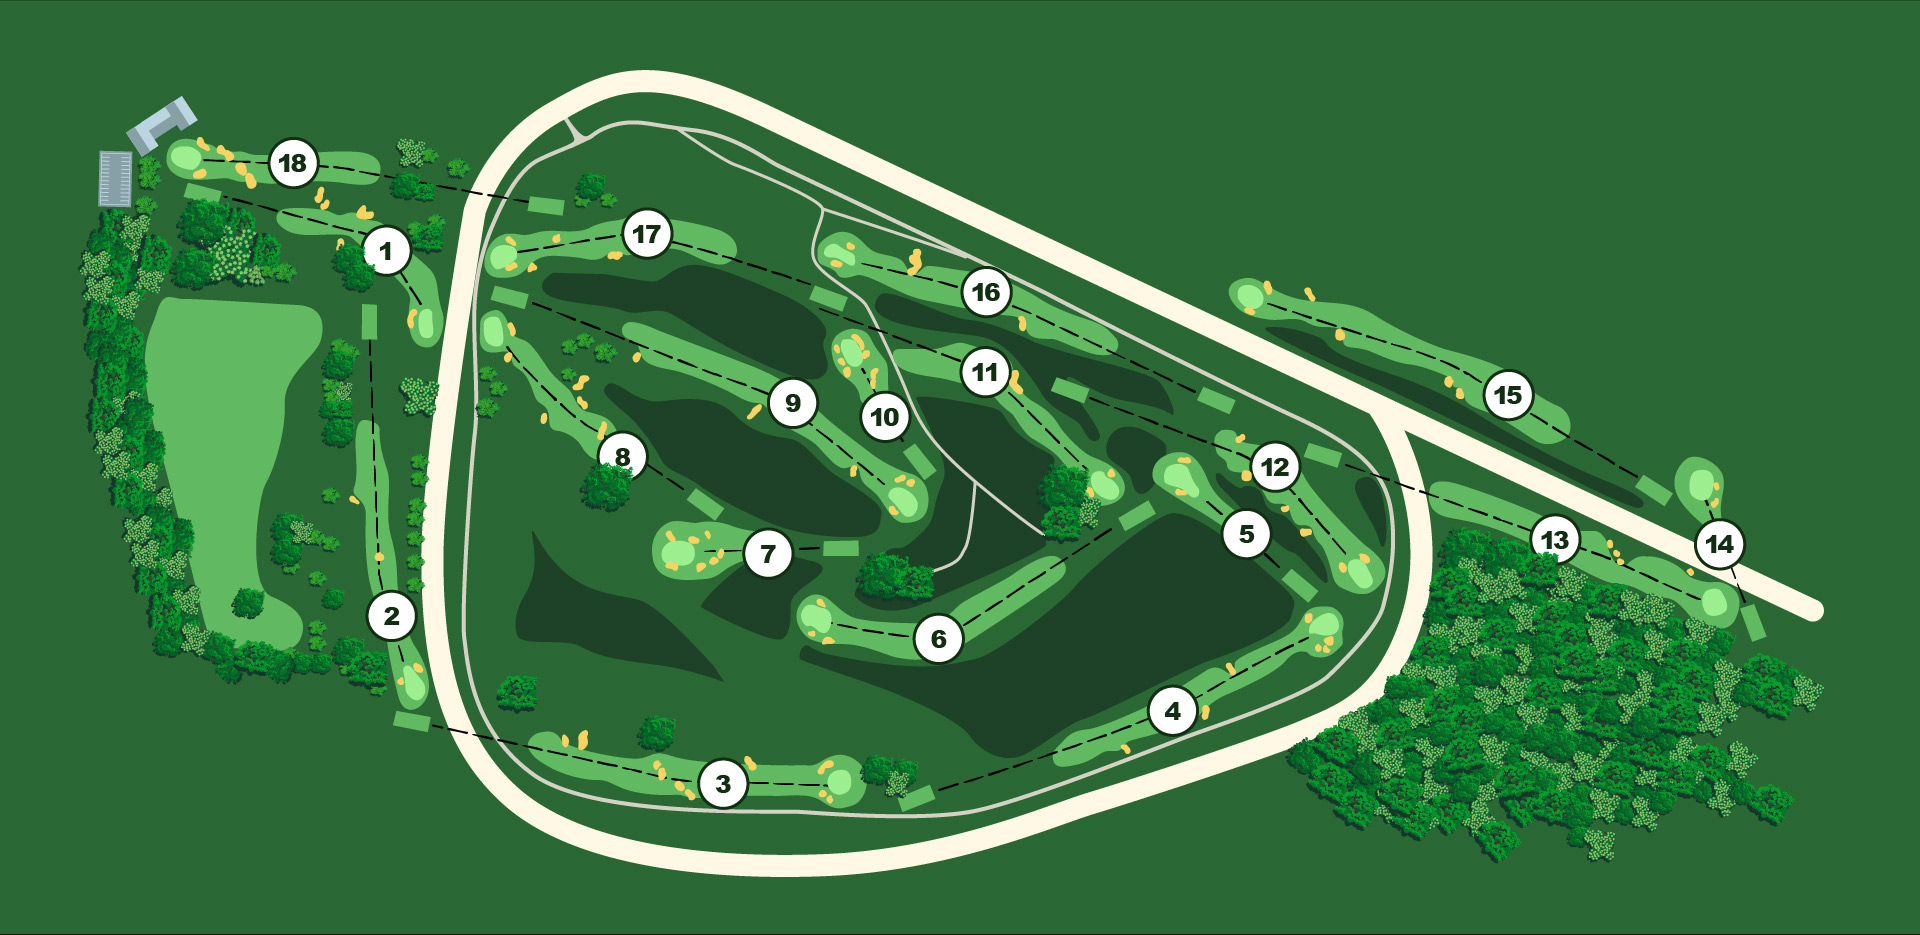 The Course